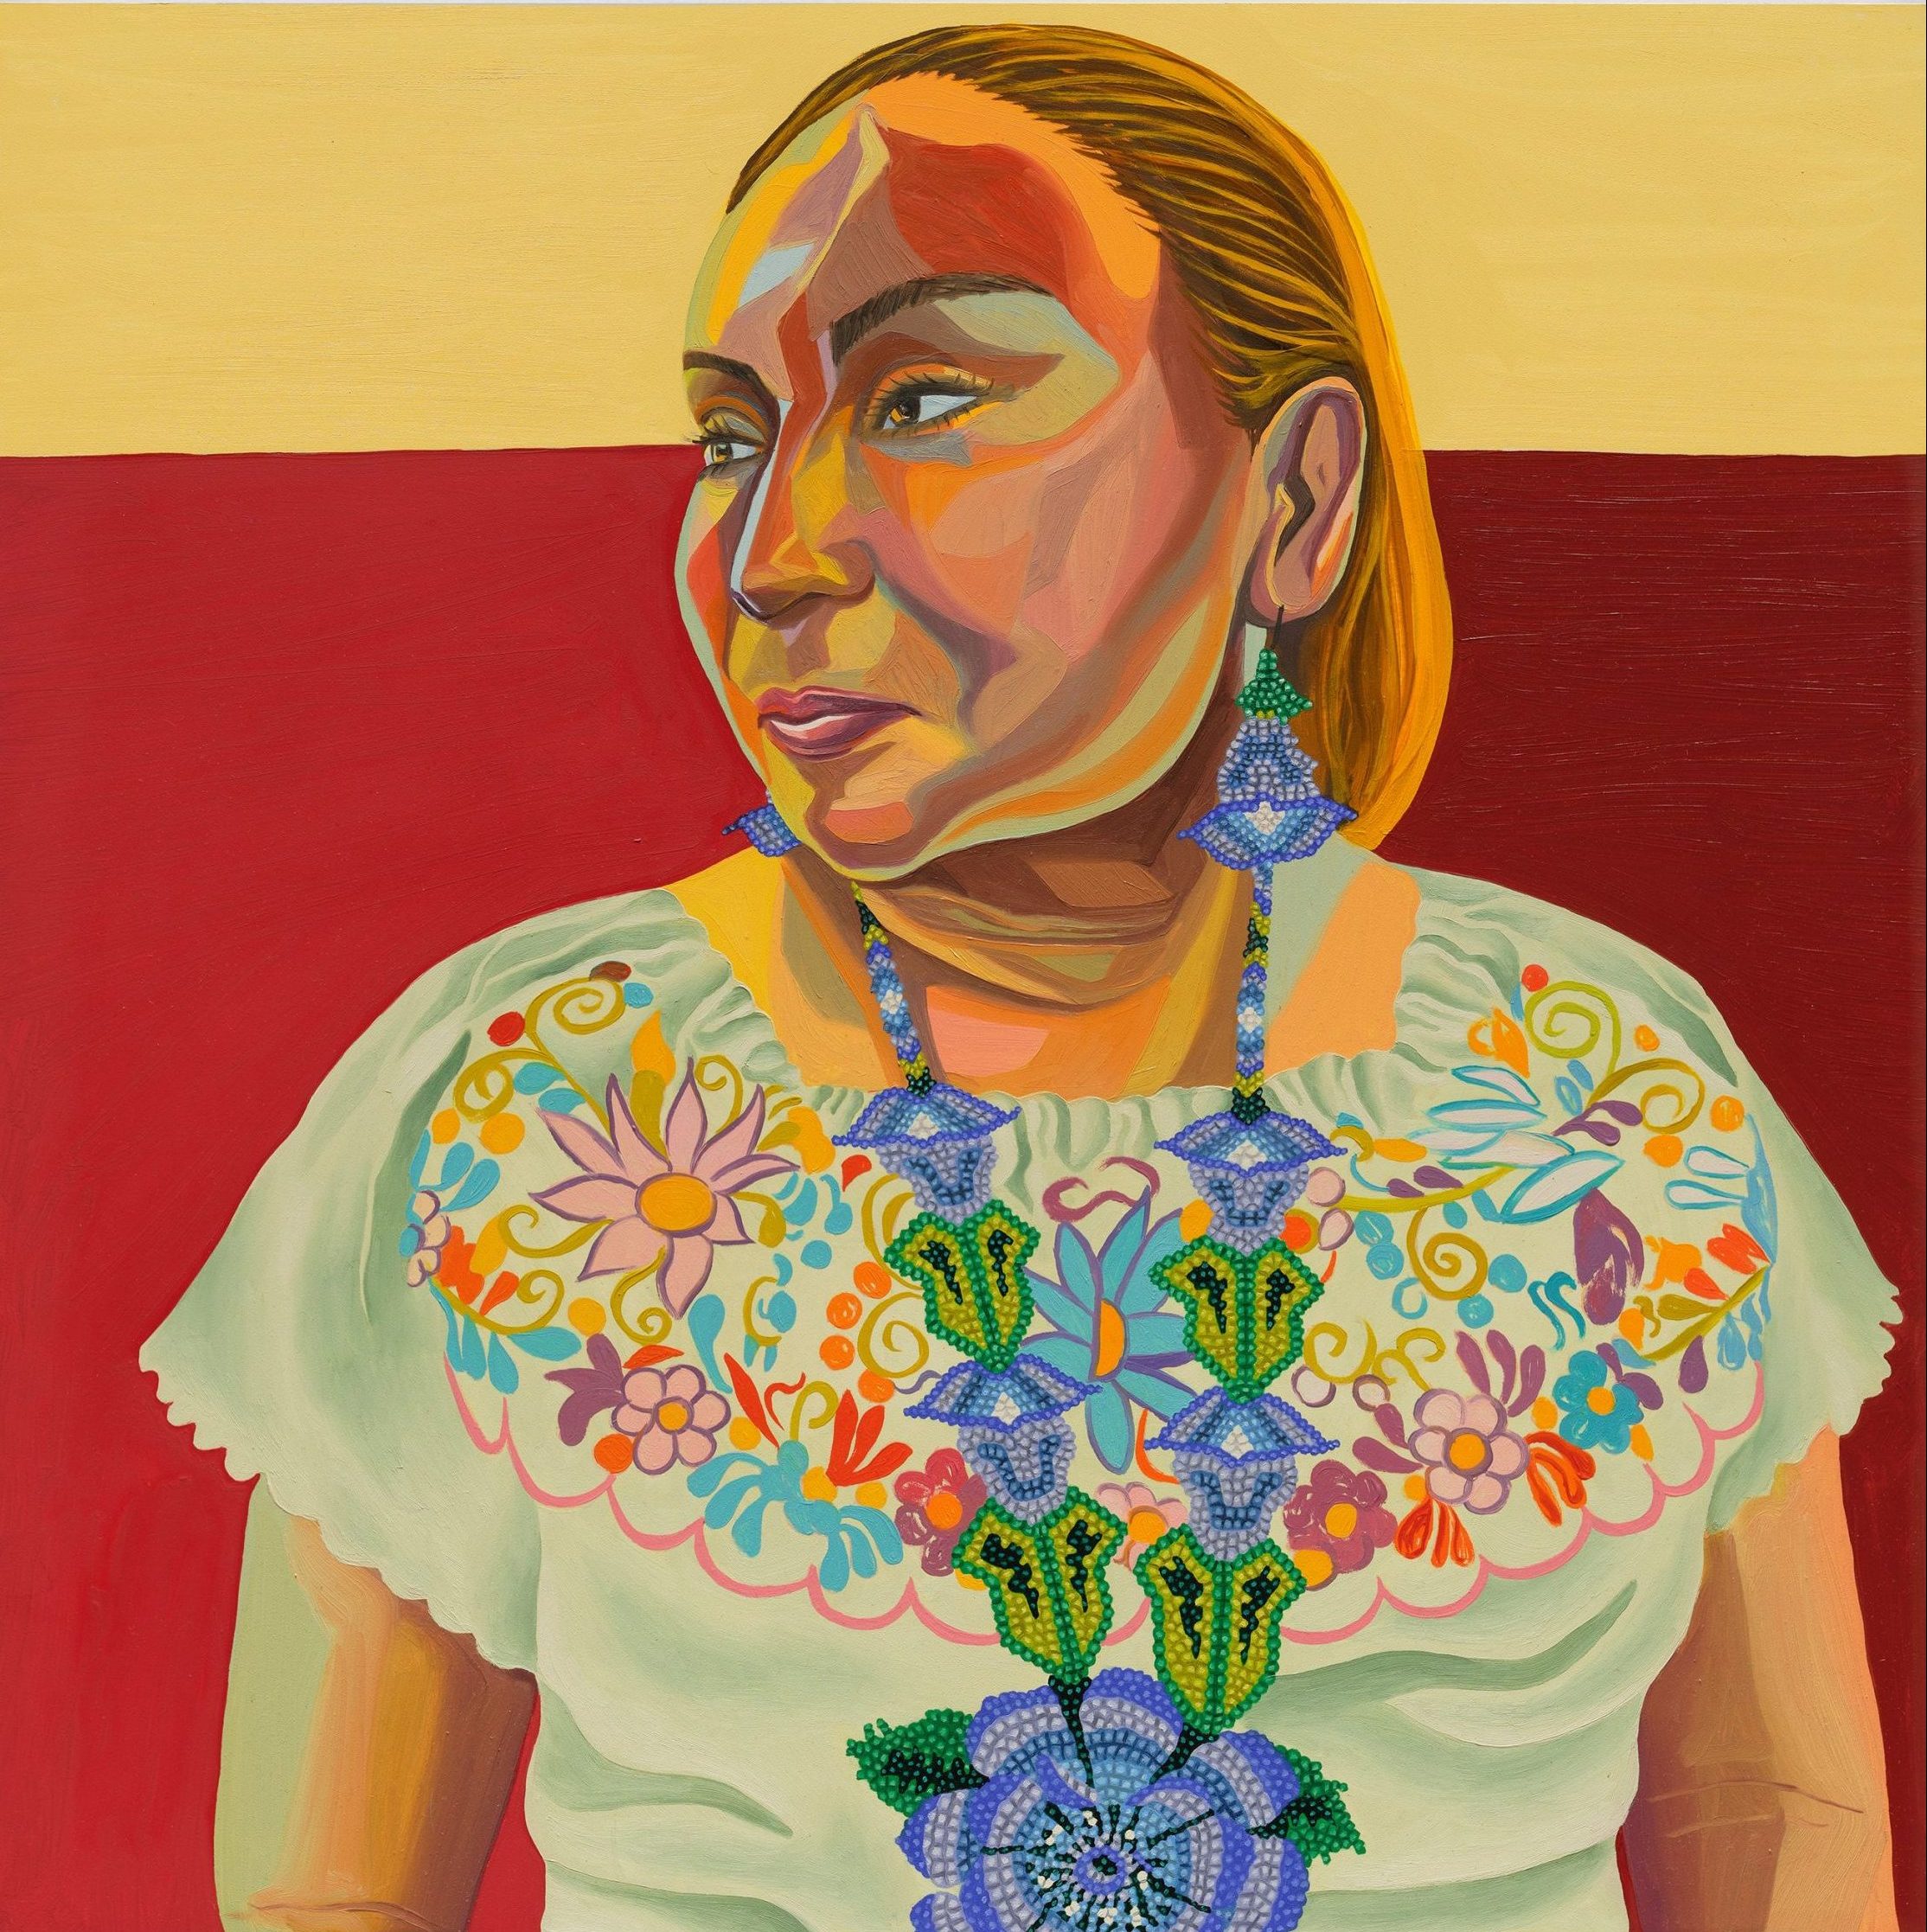 This painting depicts an older woman with blonde hair wearing a colorful floral embroidered blouse and blue and white beaded earrings. She looks to her left. Behind her is a solid red and tan background.